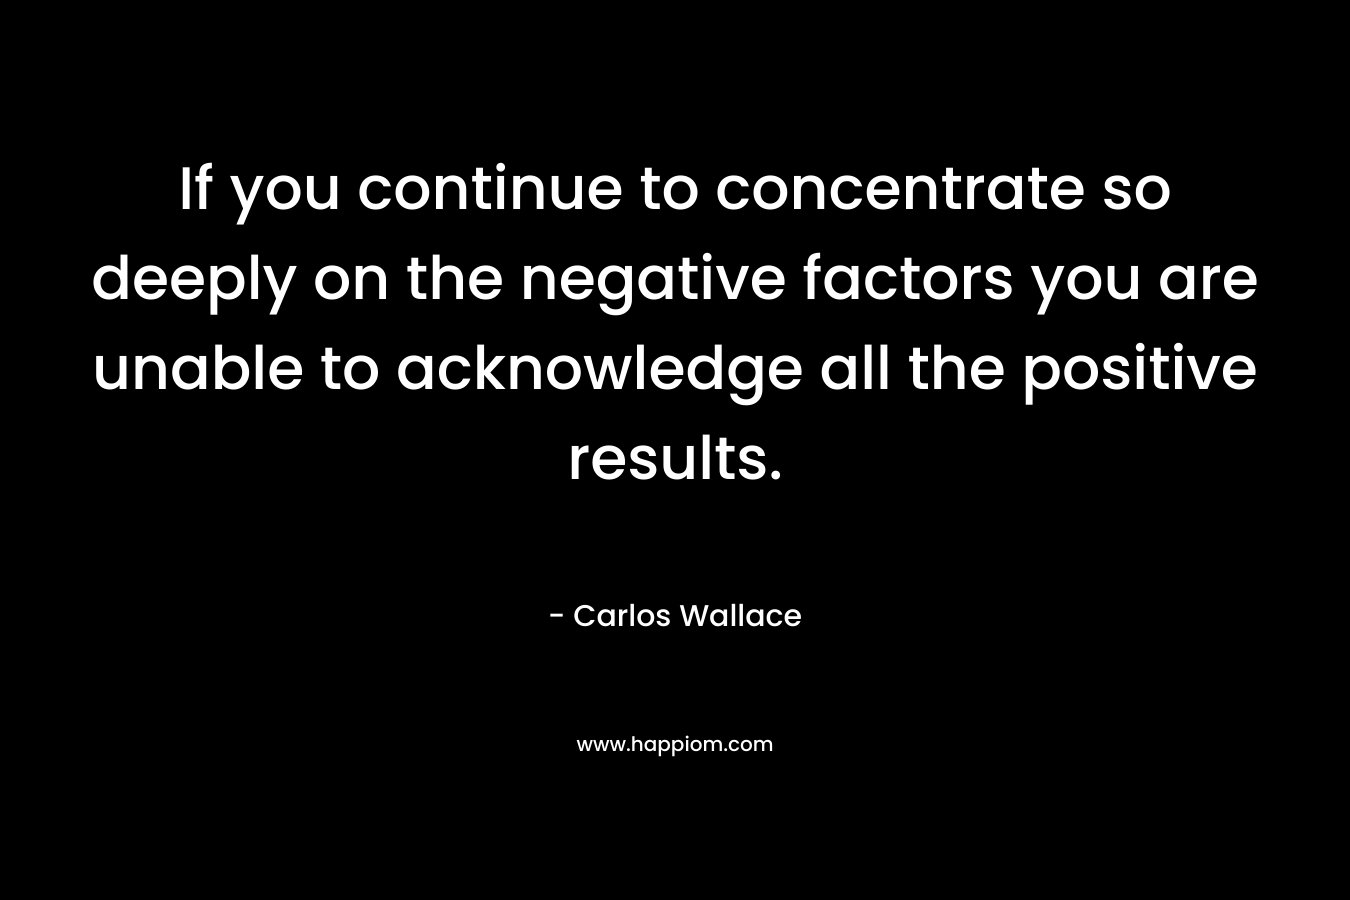 If you continue to concentrate so deeply on the negative factors you are unable to acknowledge all the positive results.